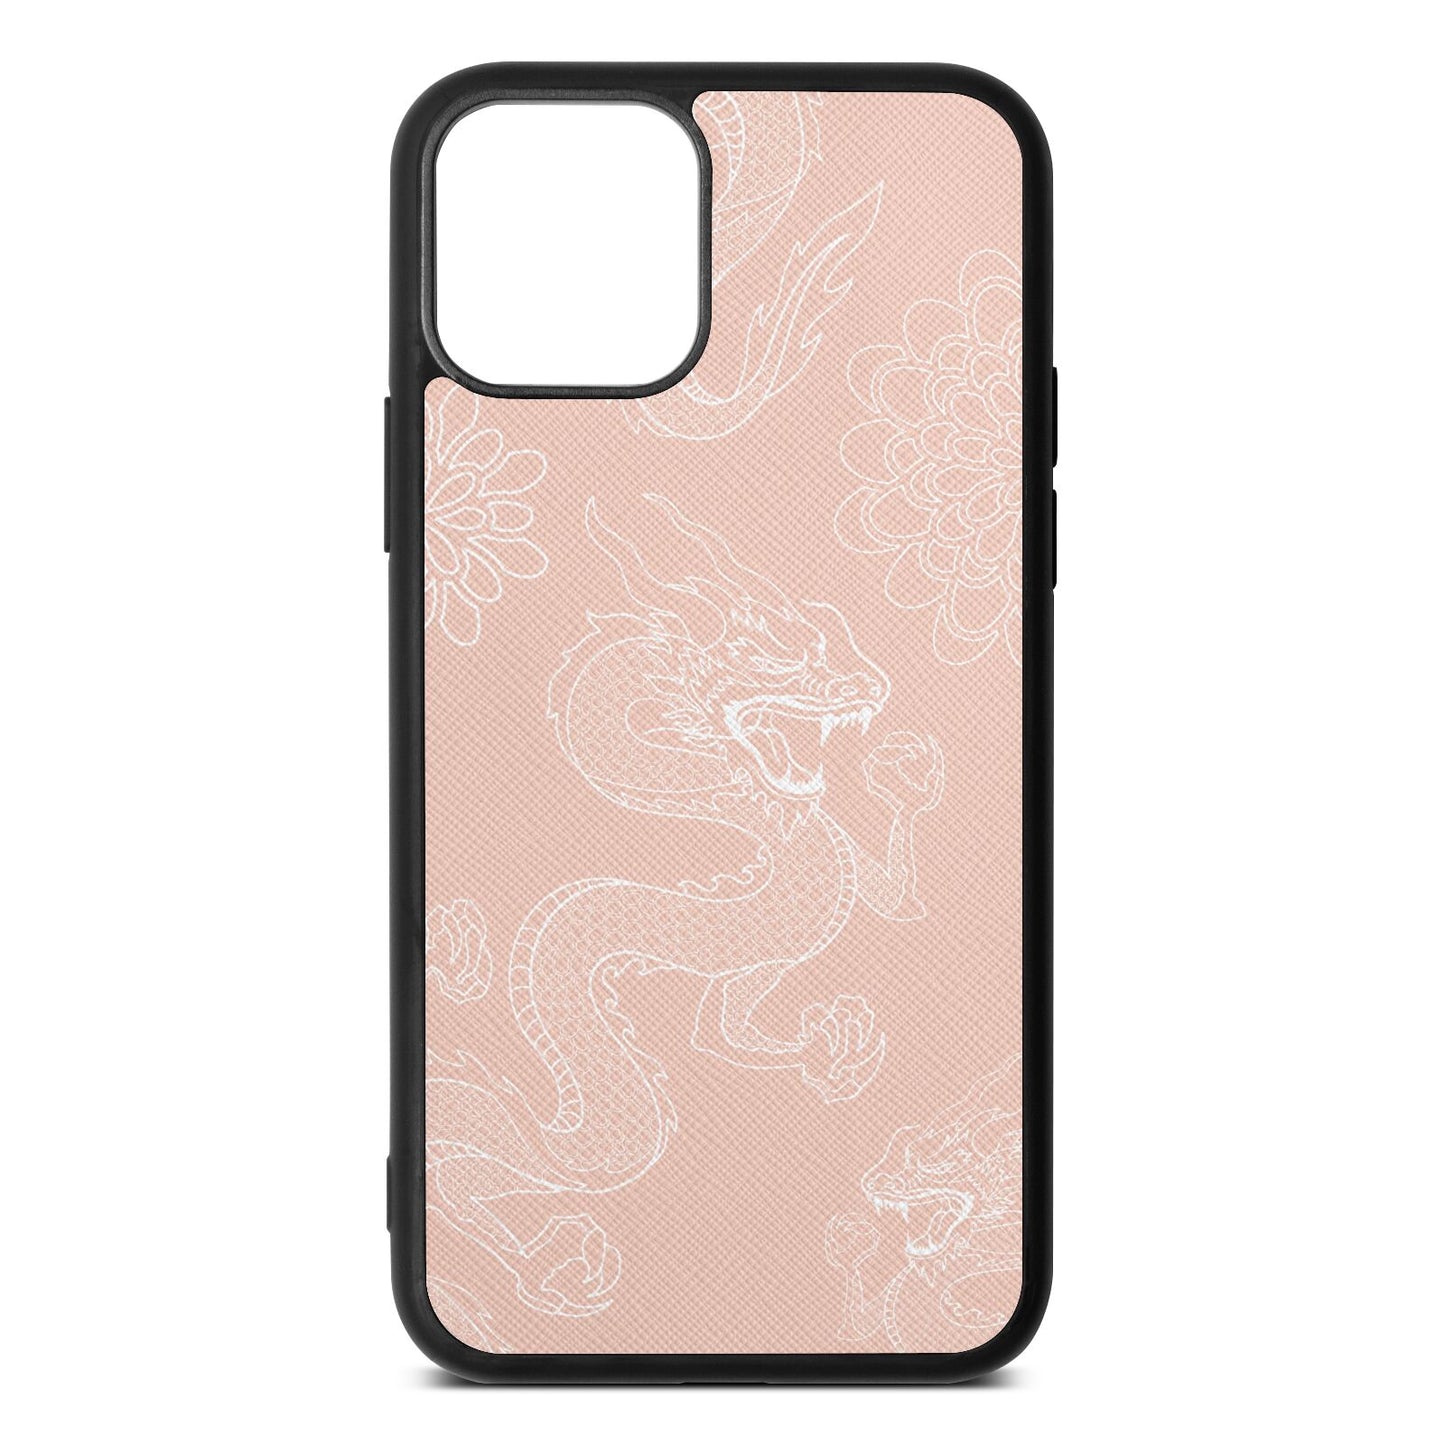 Dragons Nude Saffiano Leather iPhone 11 Pro Case